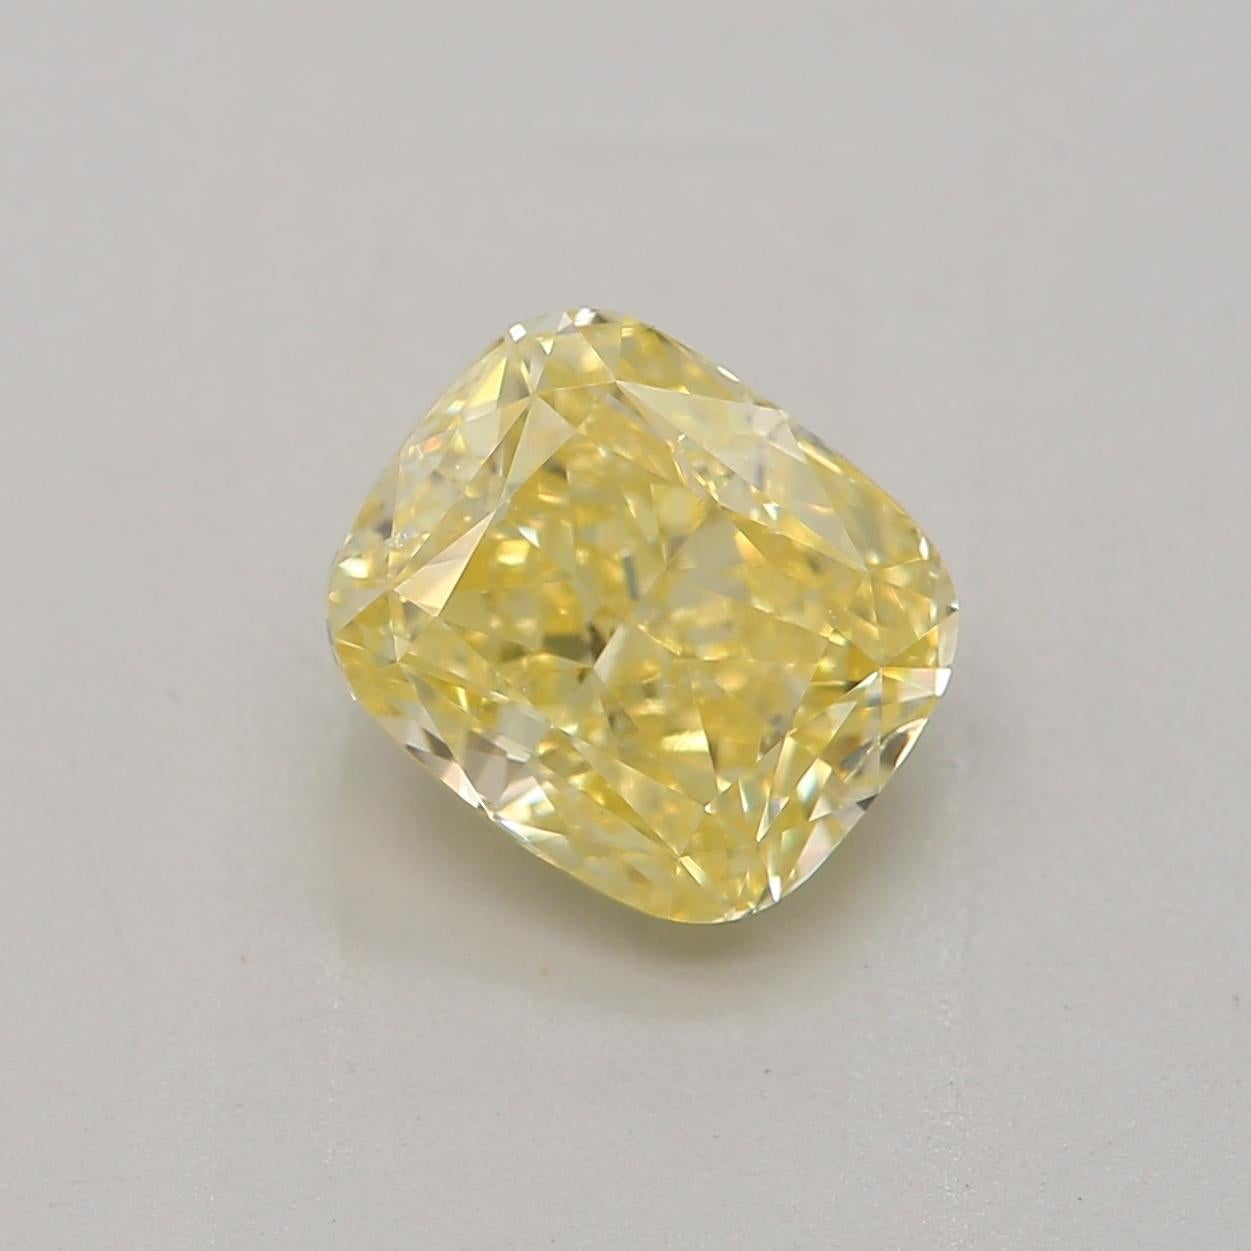 ***100% NATURAL FANCY COLOUR DIAMOND***

✪ Diamond Details ✪

➛ Shape: Cushion
➛ Colour Grade: Fancy Intense Yellow
➛ Carat: 1.00
➛ Clarity: SI2
➛ GIA Certified 

^FEATURES OF THE DIAMOND^

This Fancy Intense Yellow Diamond is a vivid and vibrant